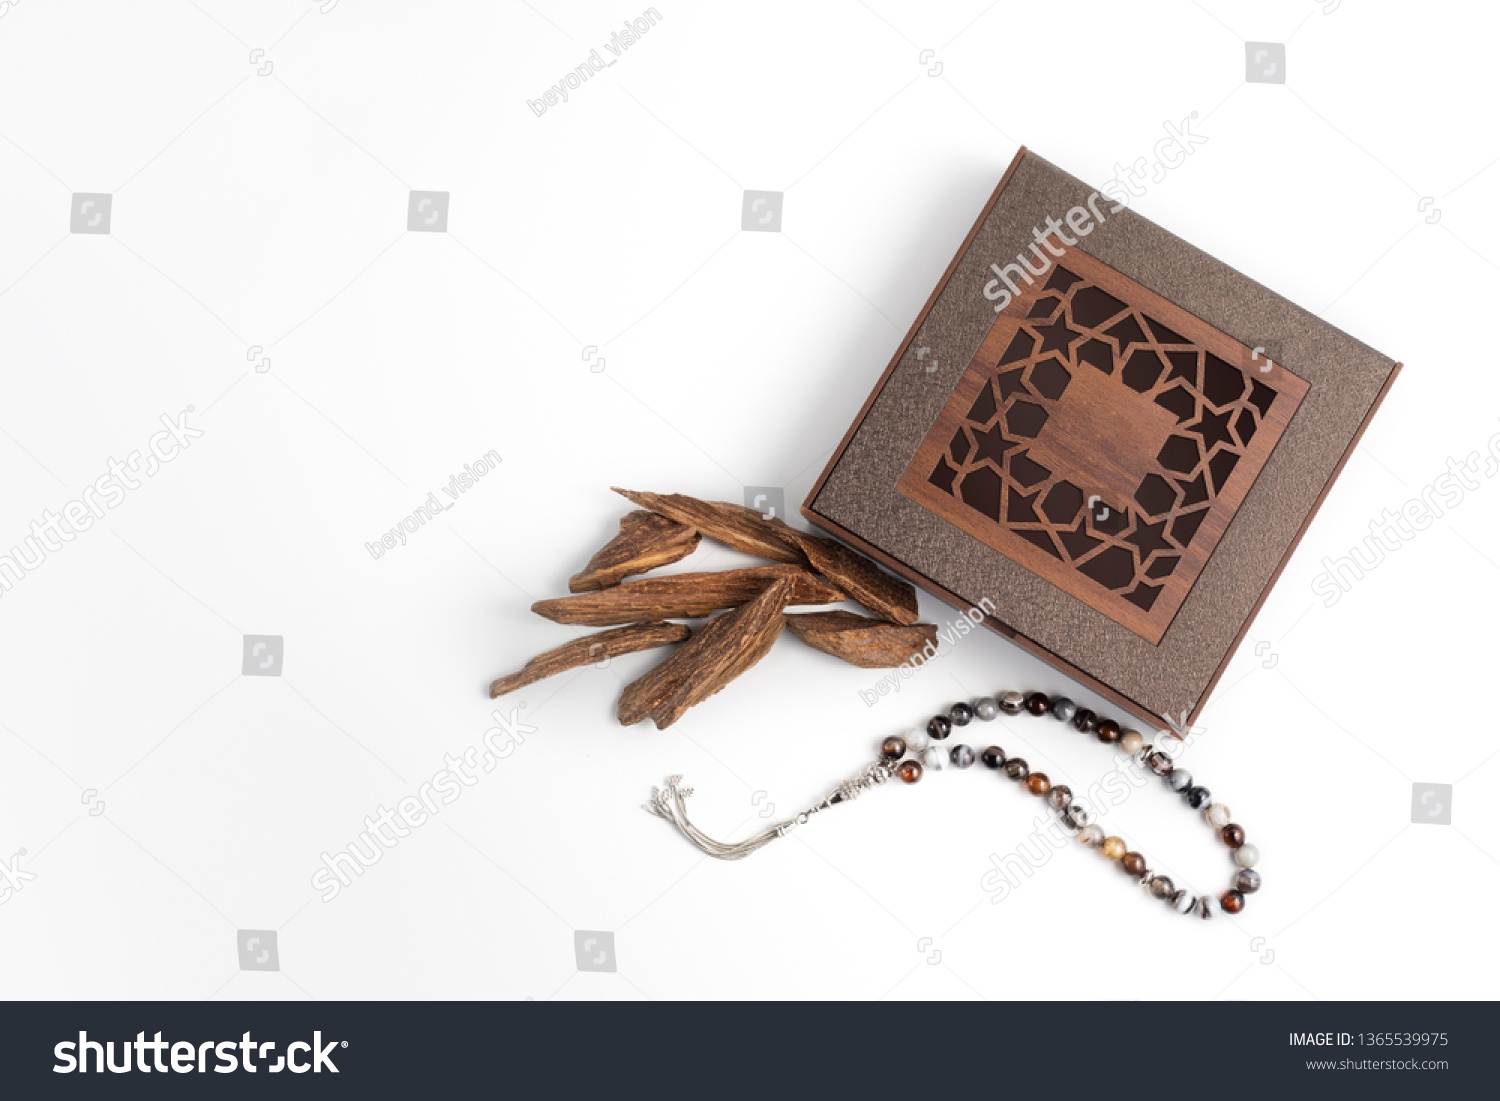 incense Chips, Agarwood, placed near wooden arabesque box with rosary beads isolated on white surface, it's name in Arabic Oud Wood used to incense Cloths, furniture and places for occasions  #1365539975